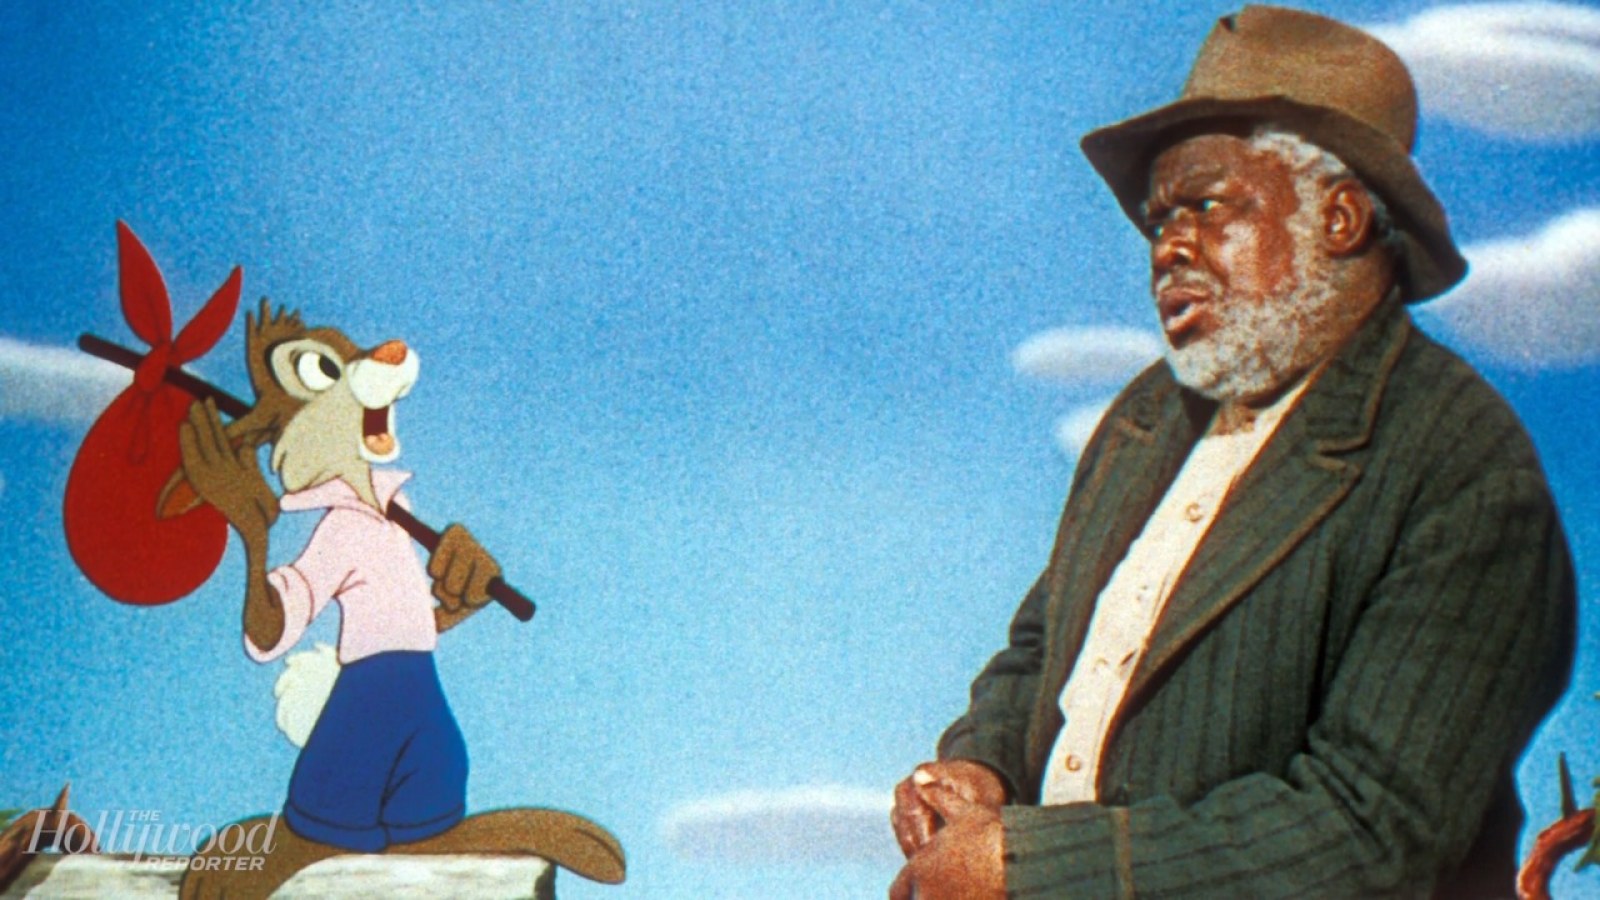 Movies That Would Never Get Made Today - song of the south disney - The Hollinwood Reporter